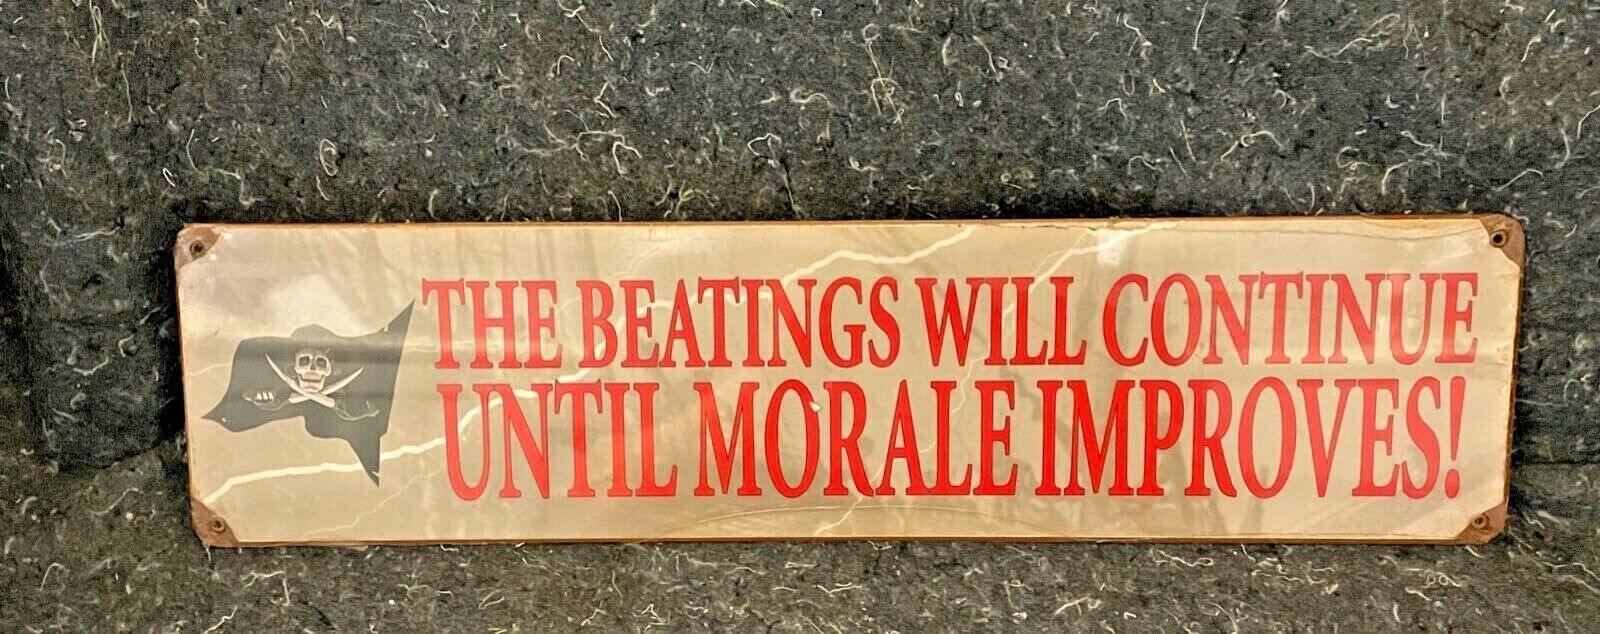 THE BEATINGS WILL CONTINUE UNTIL MORALE IMPROVES PIRATE SIGN 20 X 5  